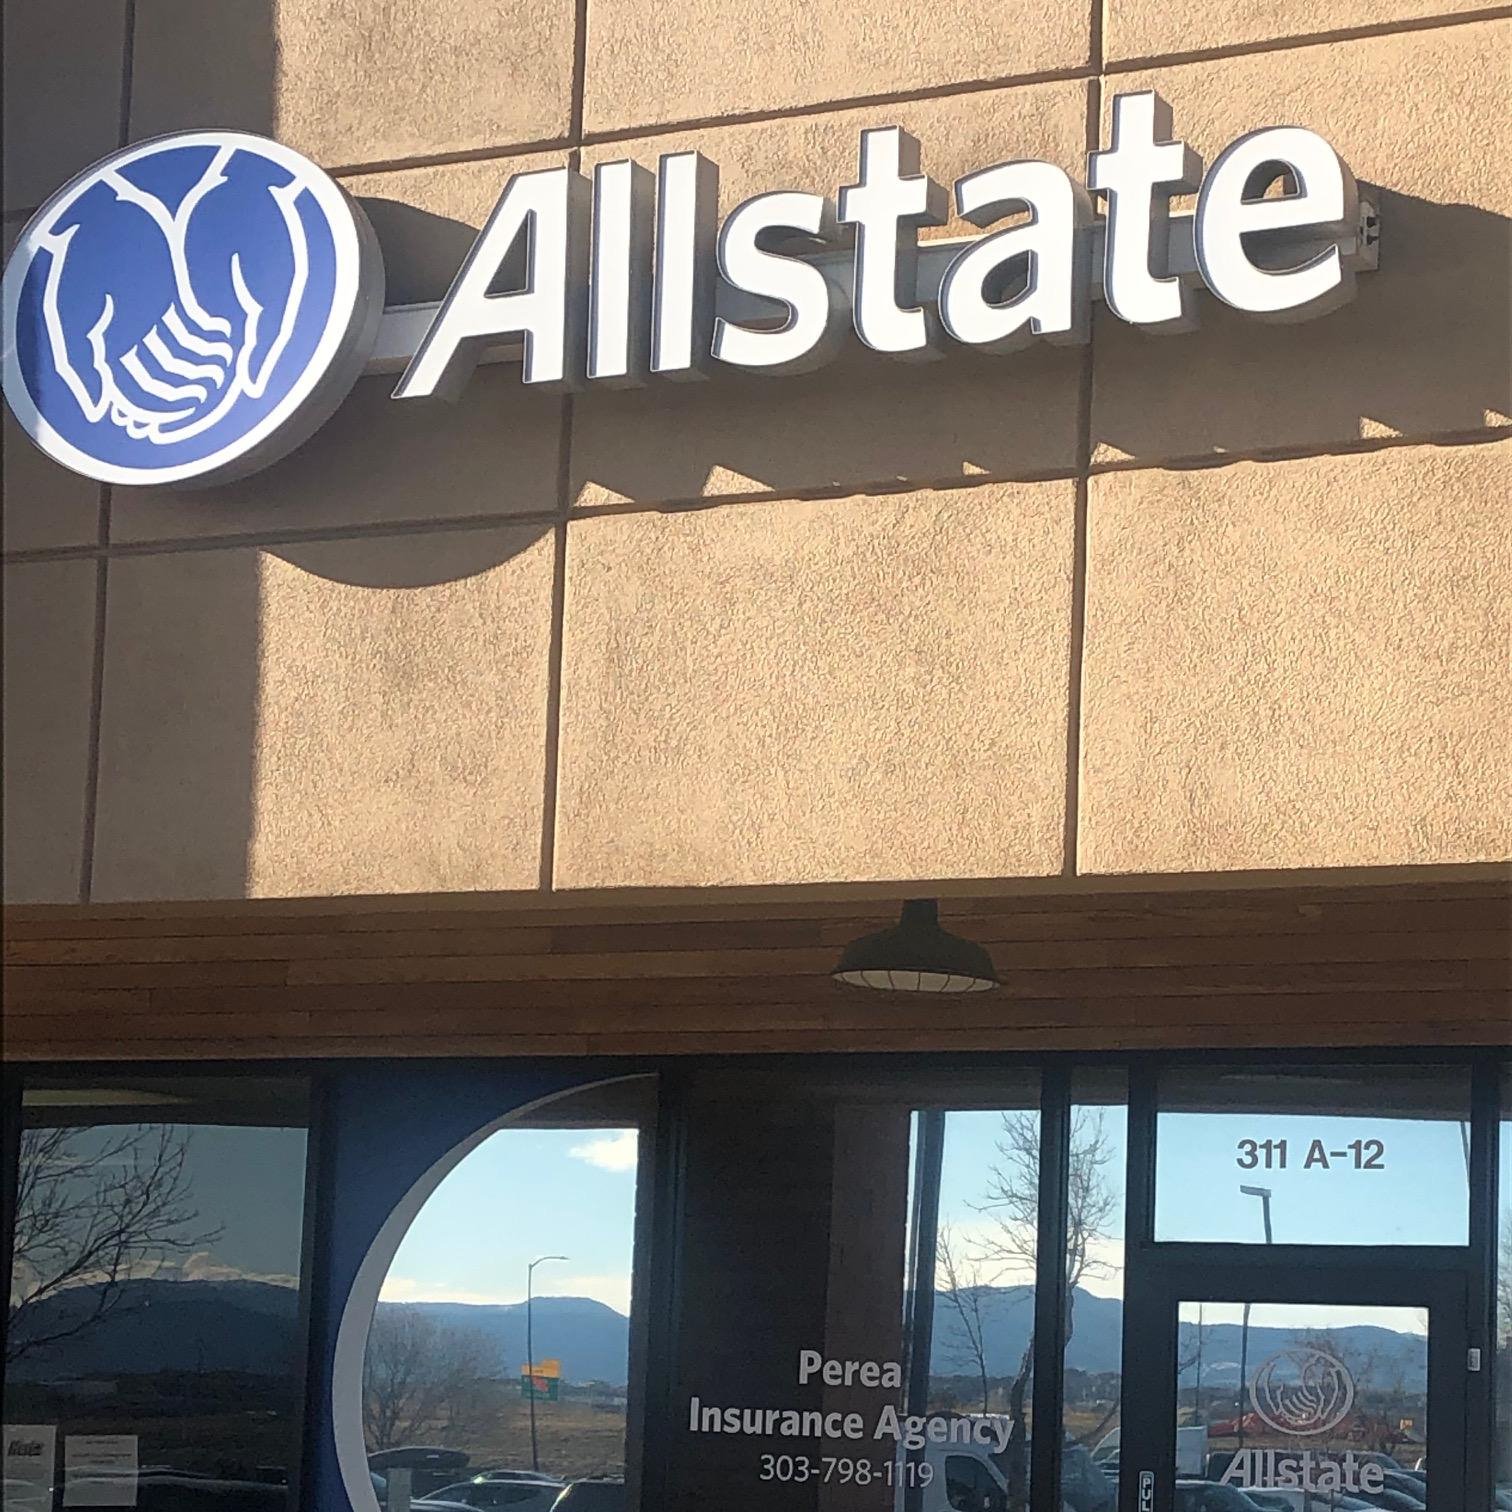 Allstate Fire And Casualty Insurance Company Headquarters